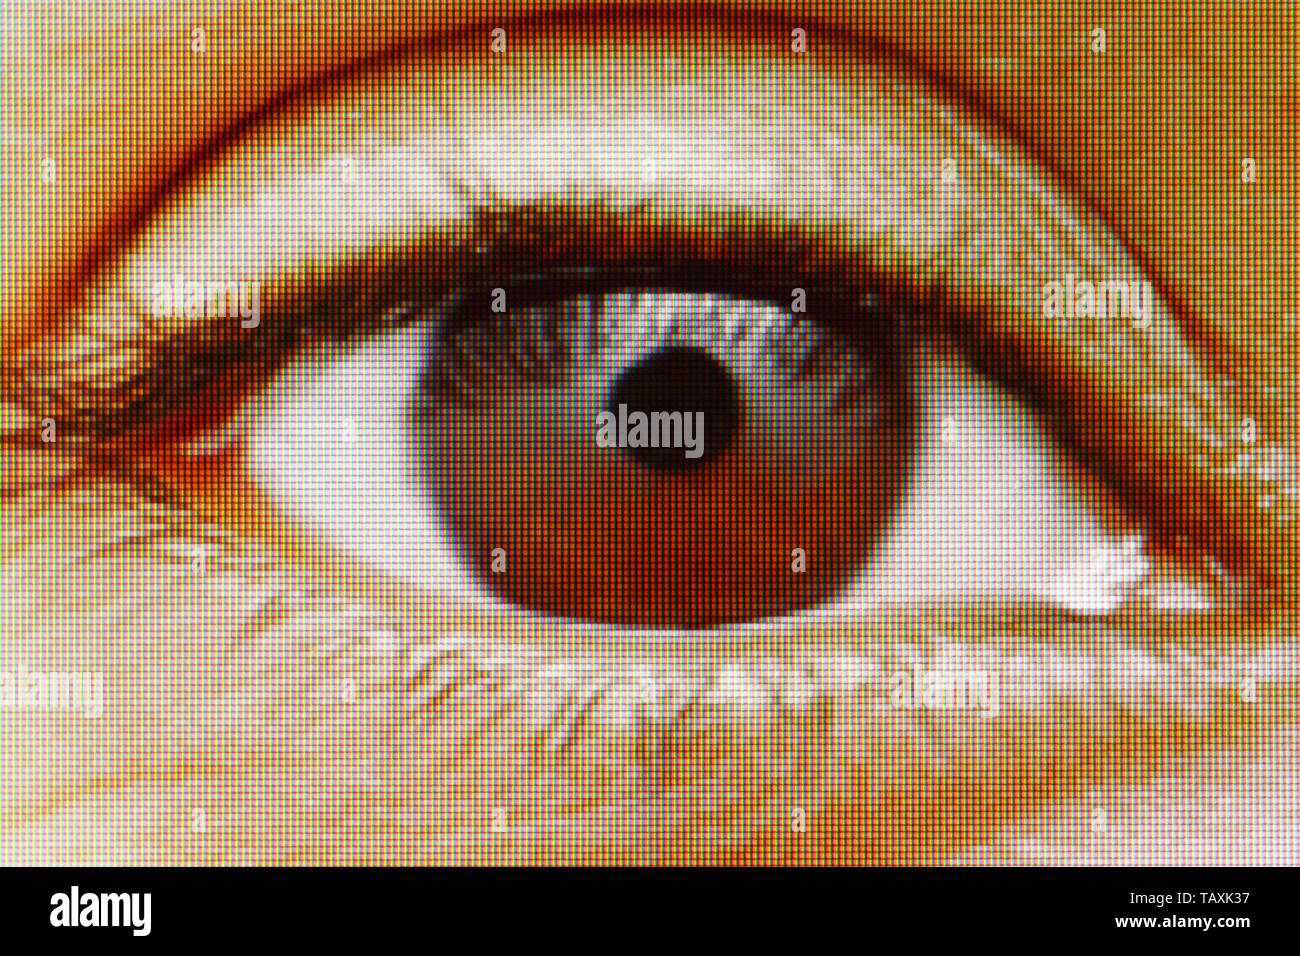 LED screen close up of an Indian Asian woman's eye, with visible screen resolution and RGB pixels Stock Photo